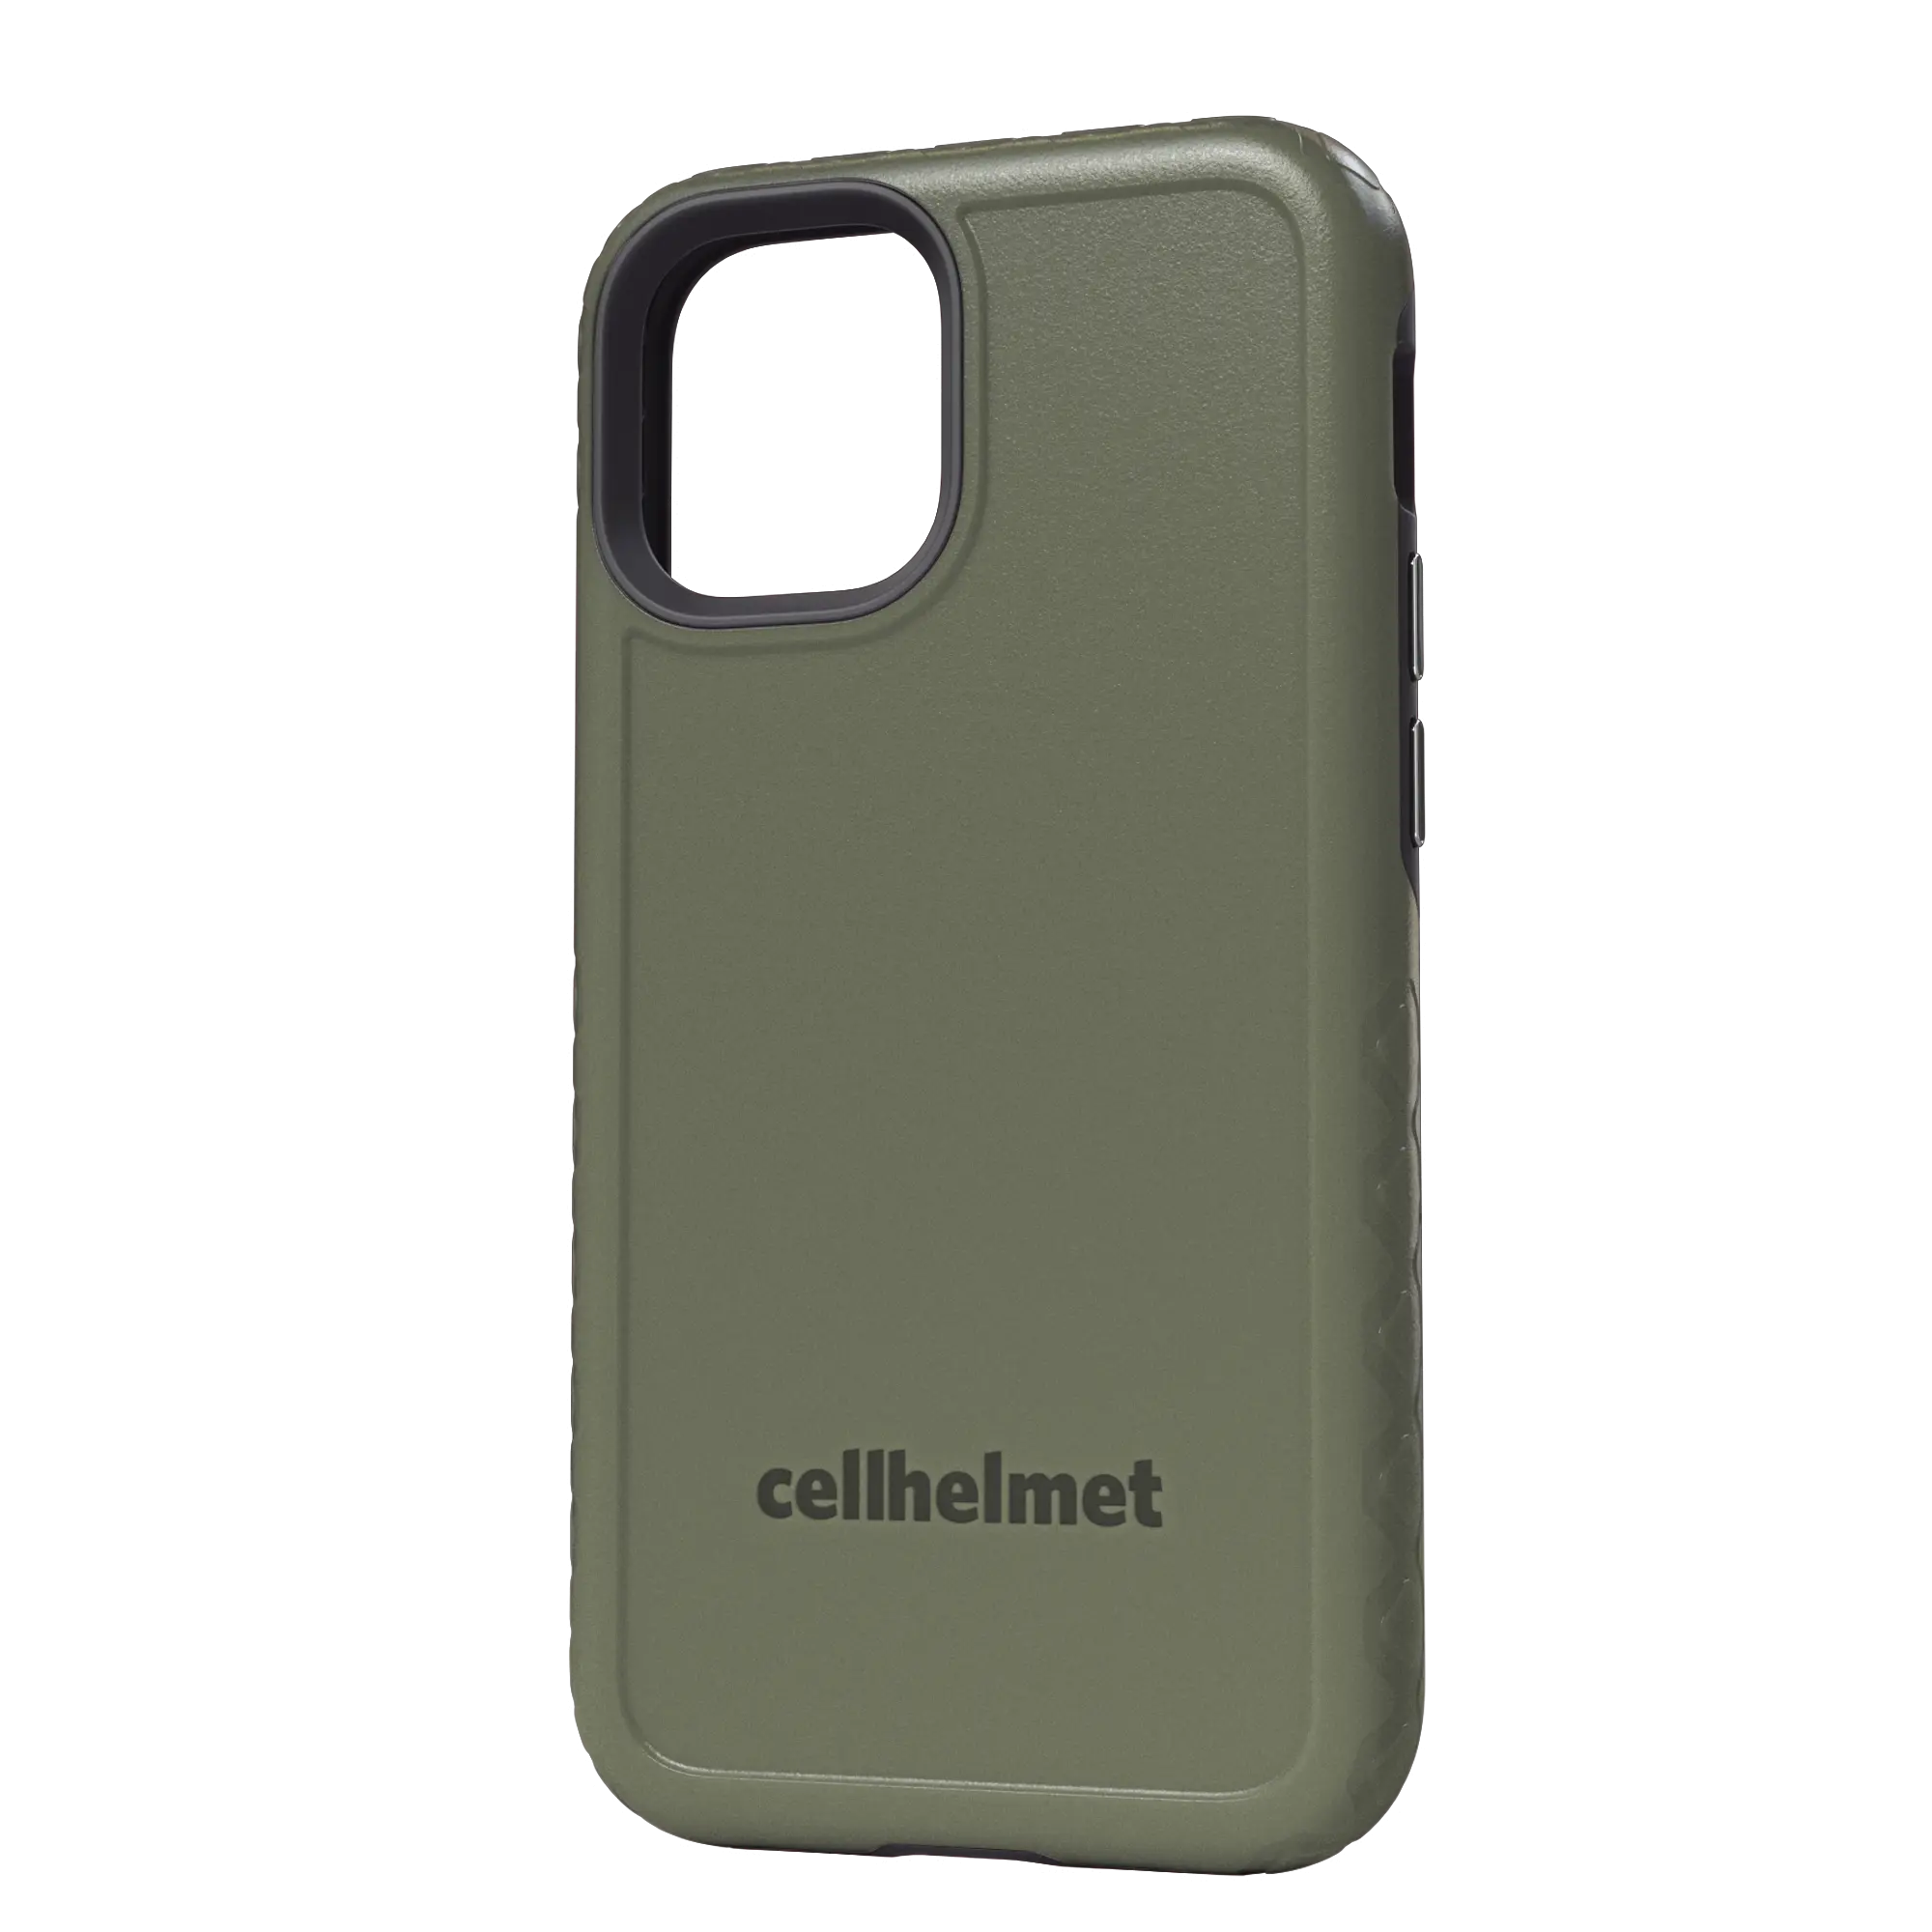 Green cellhelmet Personalized Case for iPhone 12 Mini